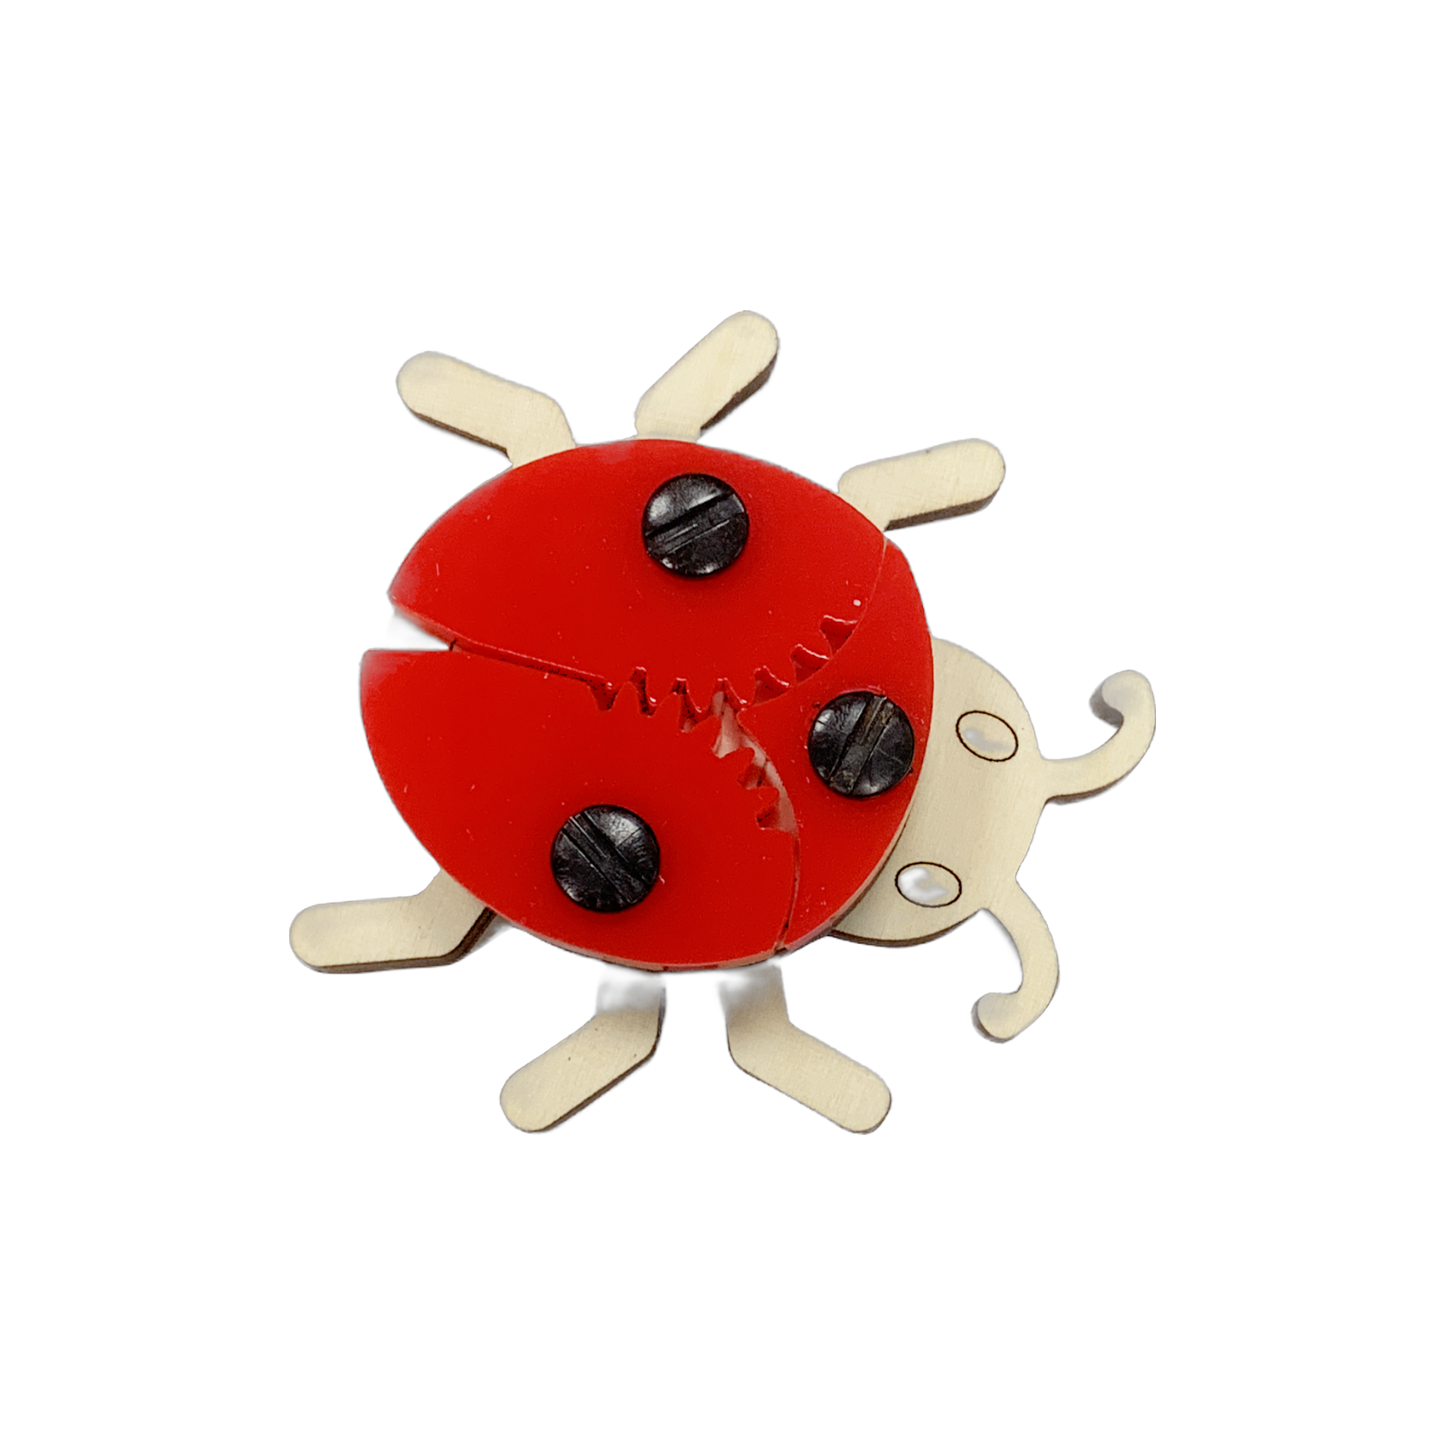 Wooden 3D Puzzle Toy - Insects: Ladybug